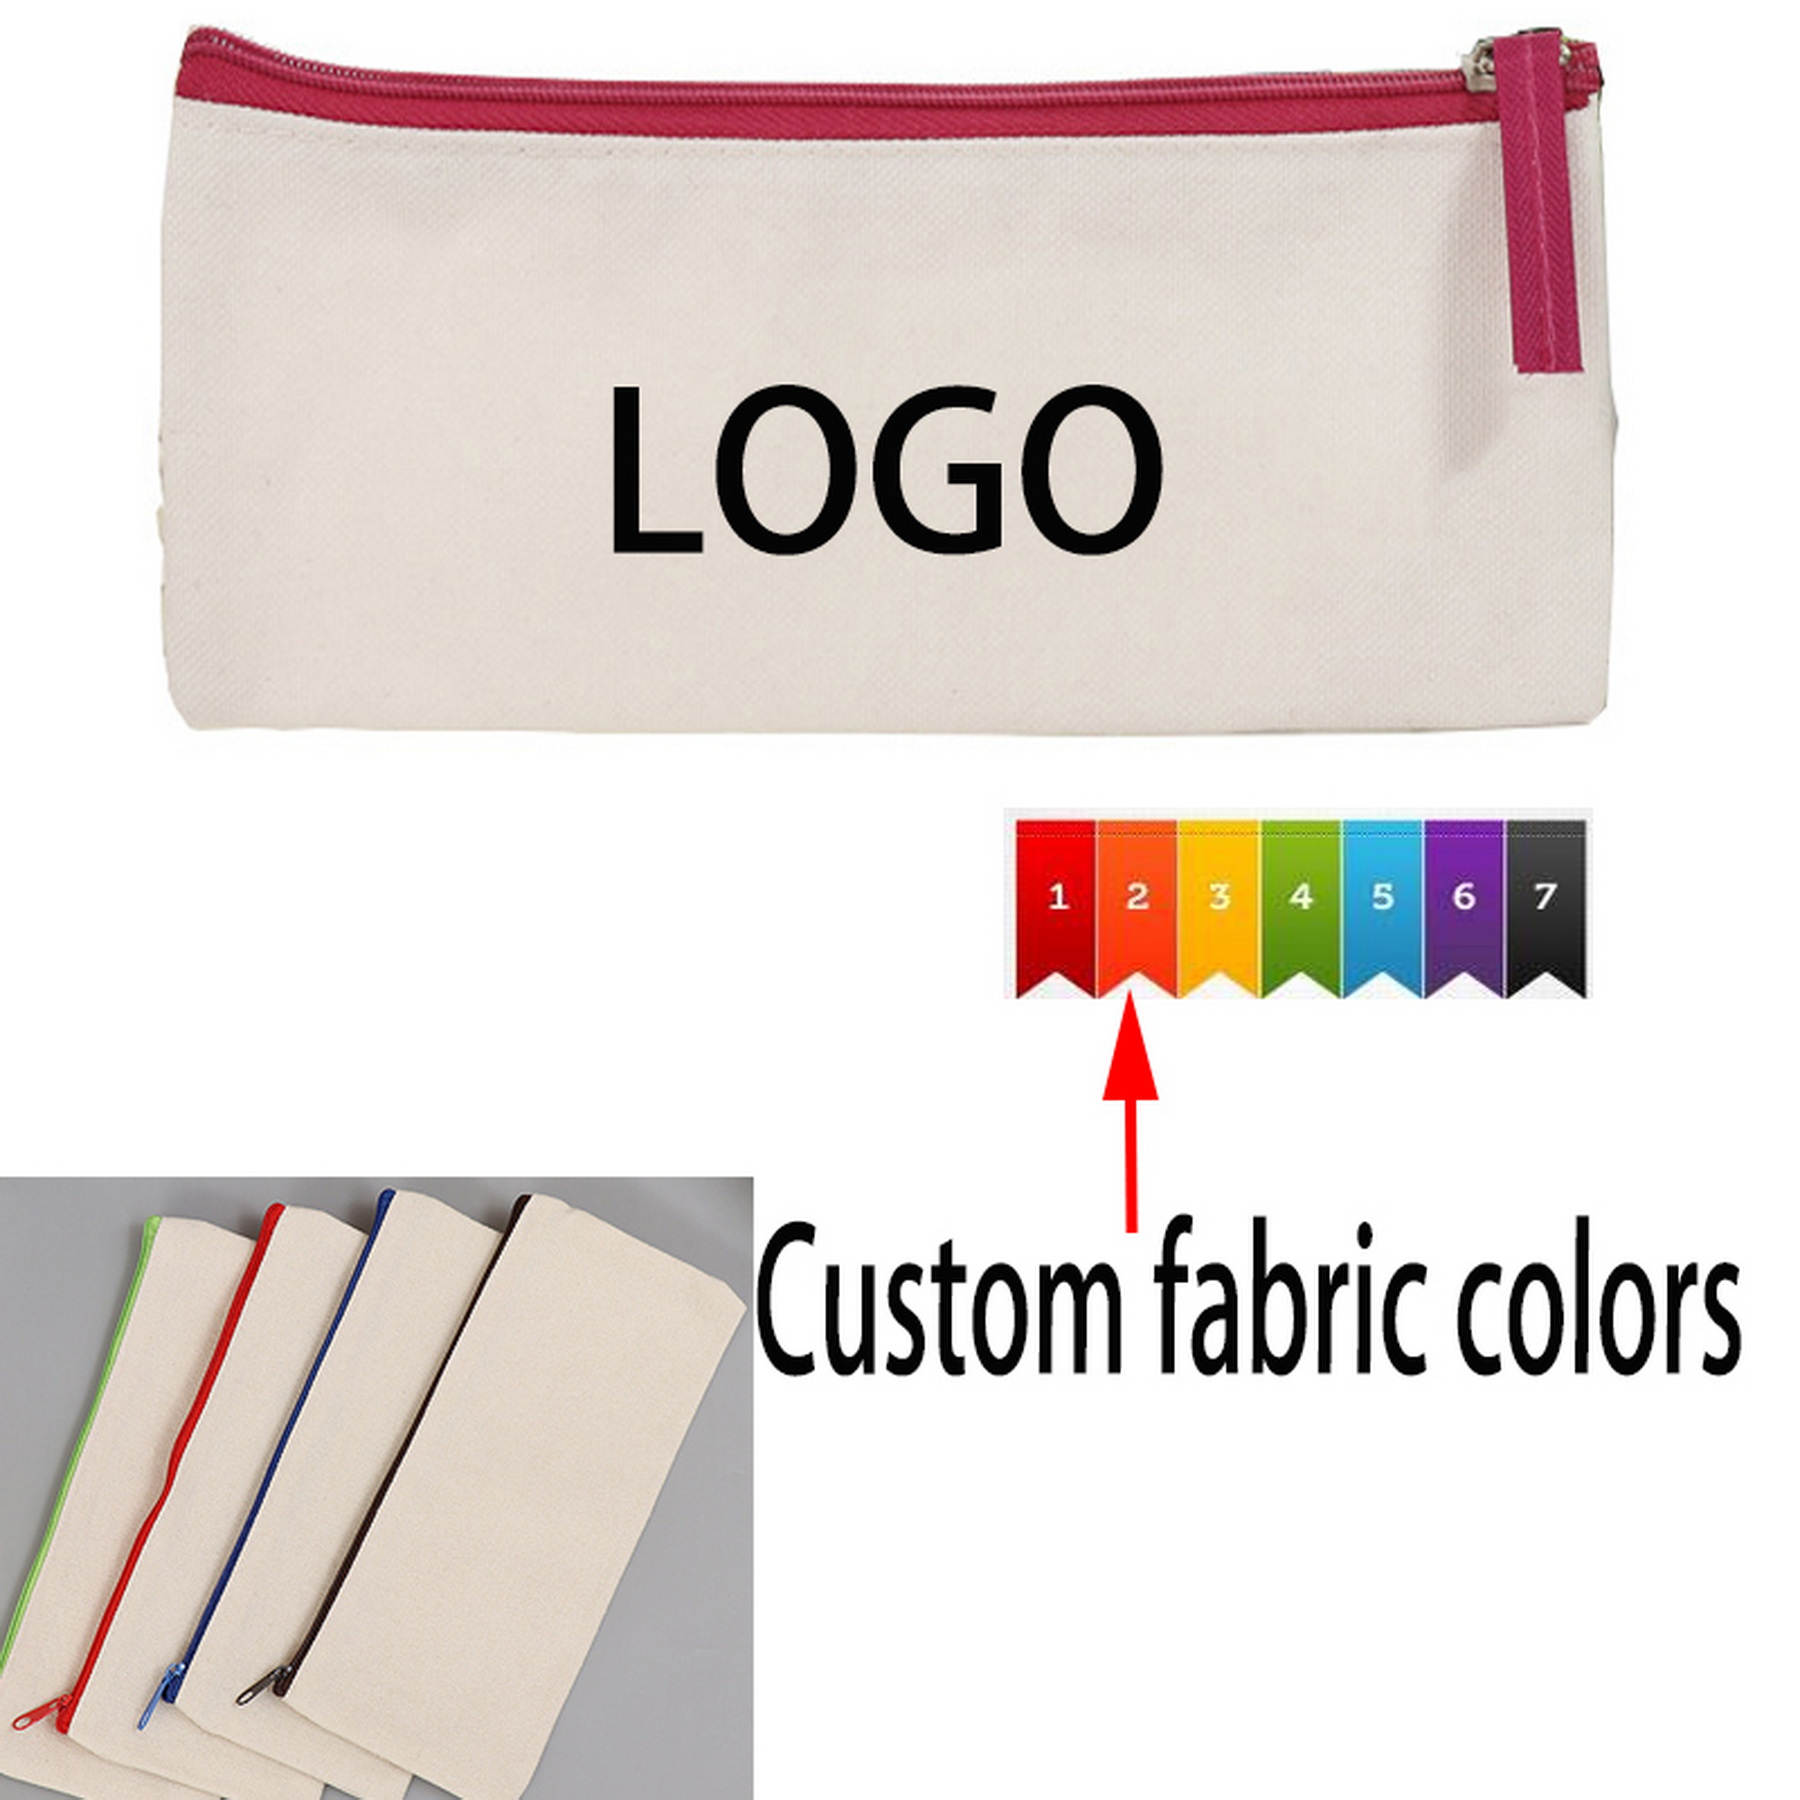 Large Blank Canvas Pen Pencil Case Stationery Pouch 